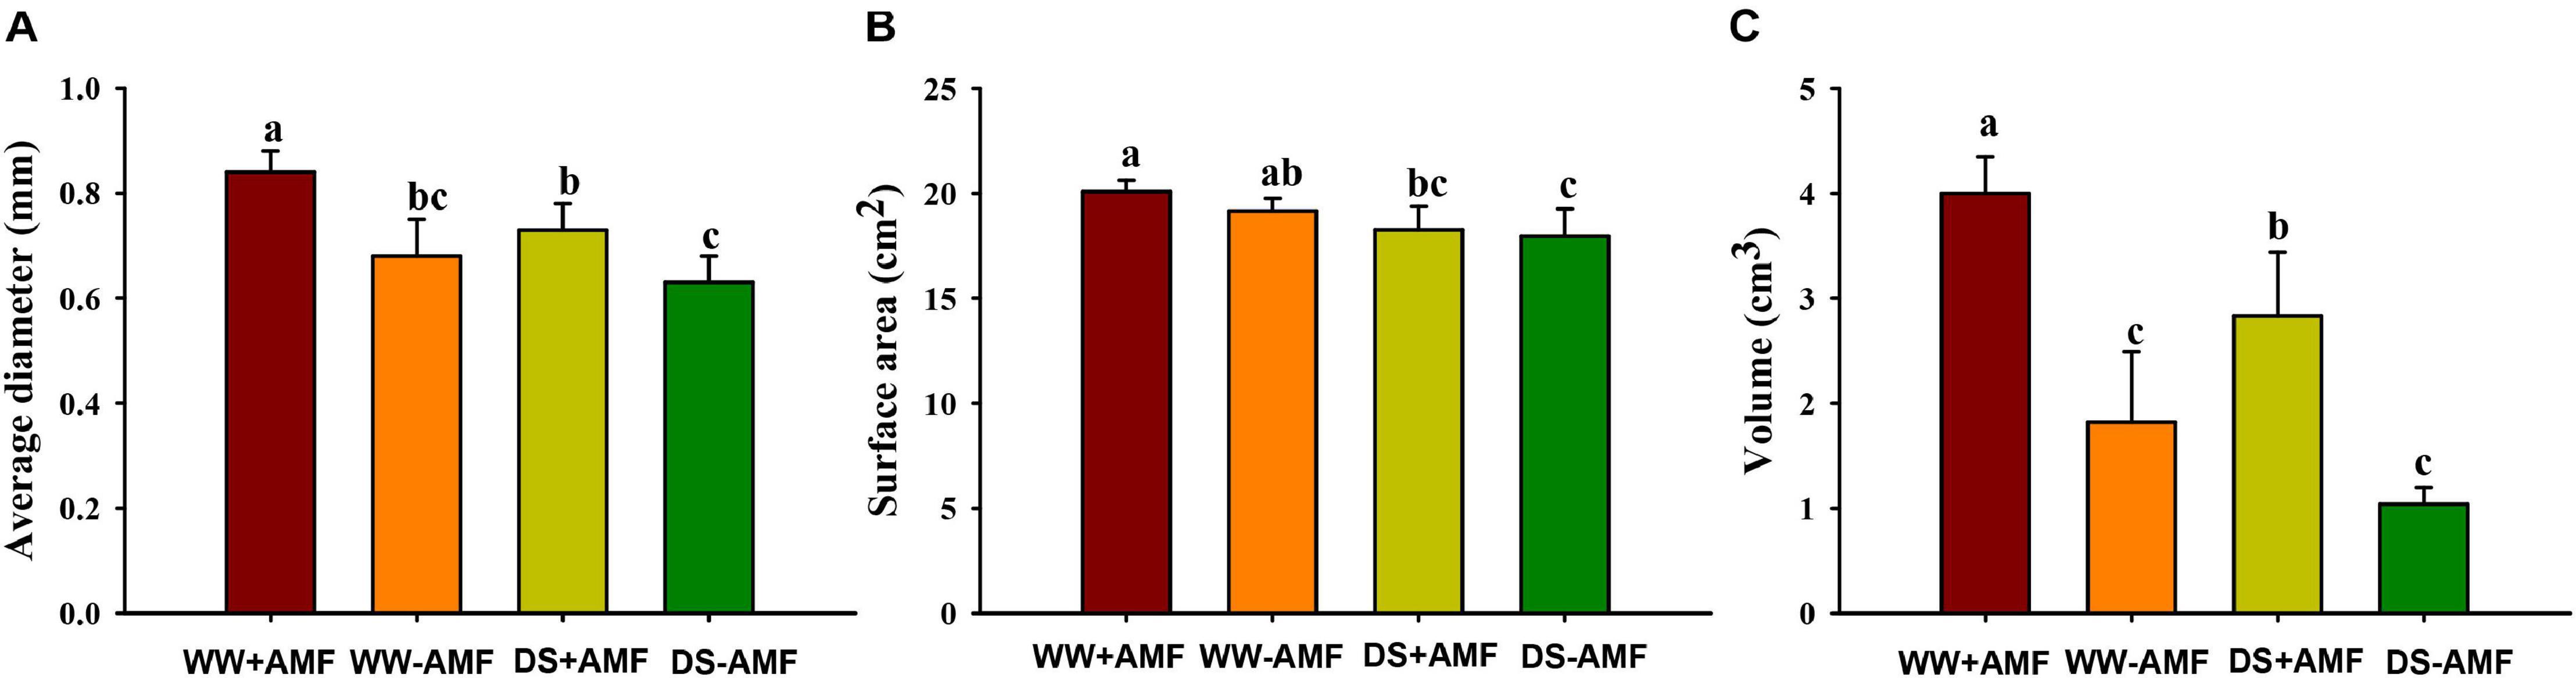 Frontiers Arbuscular Mycorrhizal Fungi Alleviate Drought Stress In Trifoliate Orange By Regulating H Atpase Activity And Gene Expression Plant Science